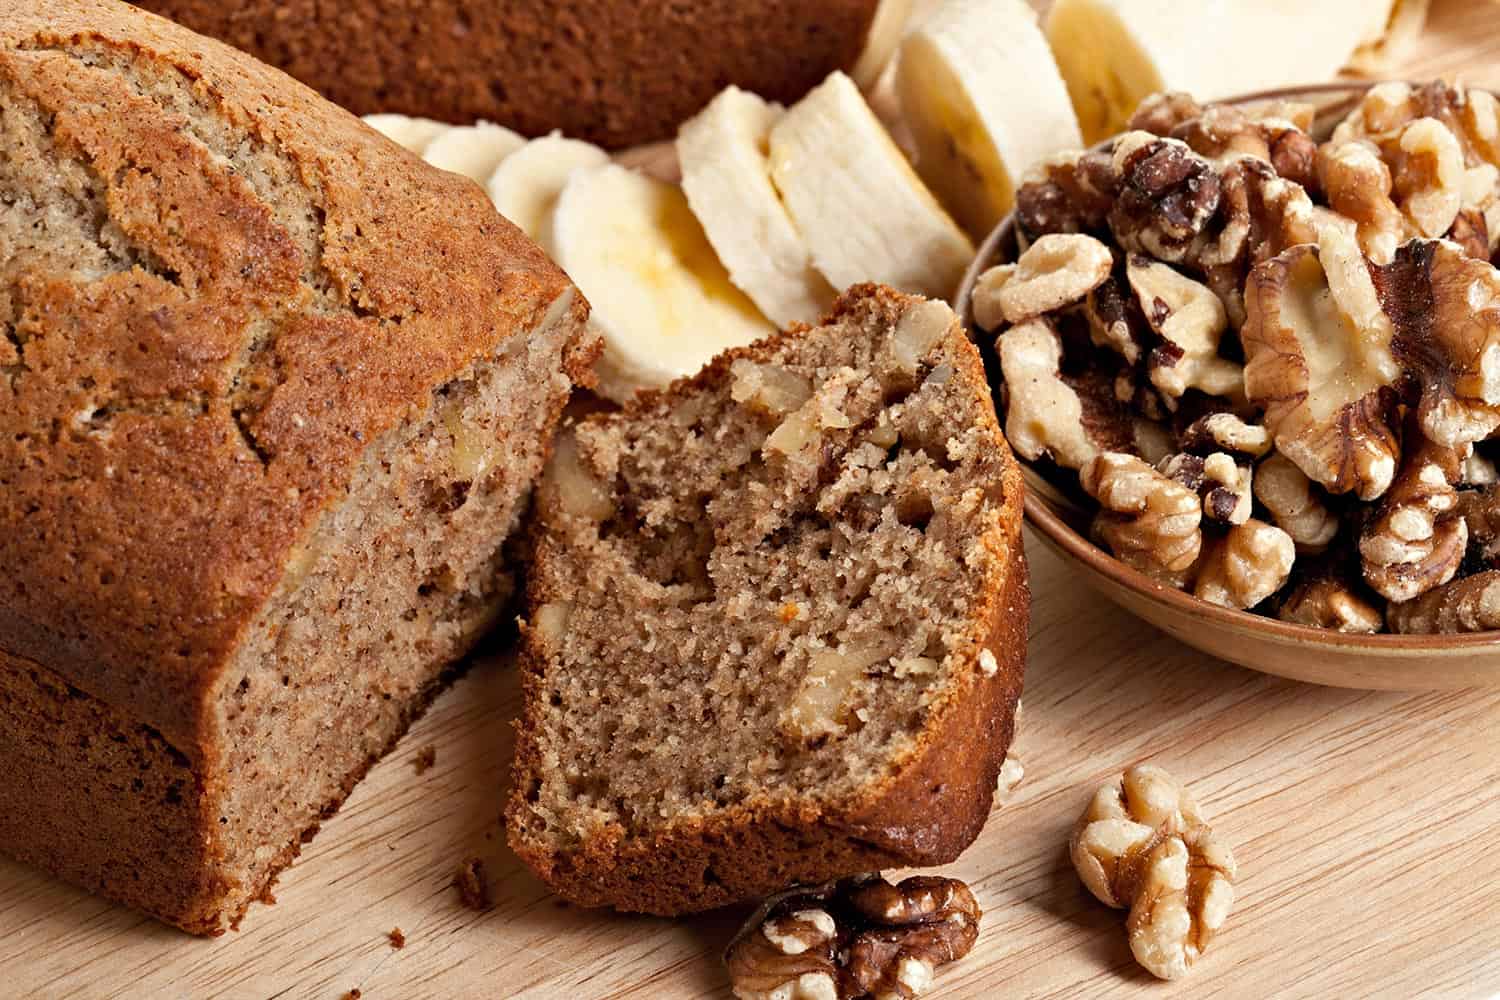 Sliced fresh baked banana bread with ingredients to bake it including walnuts and sliced fresh raw sweet bananas